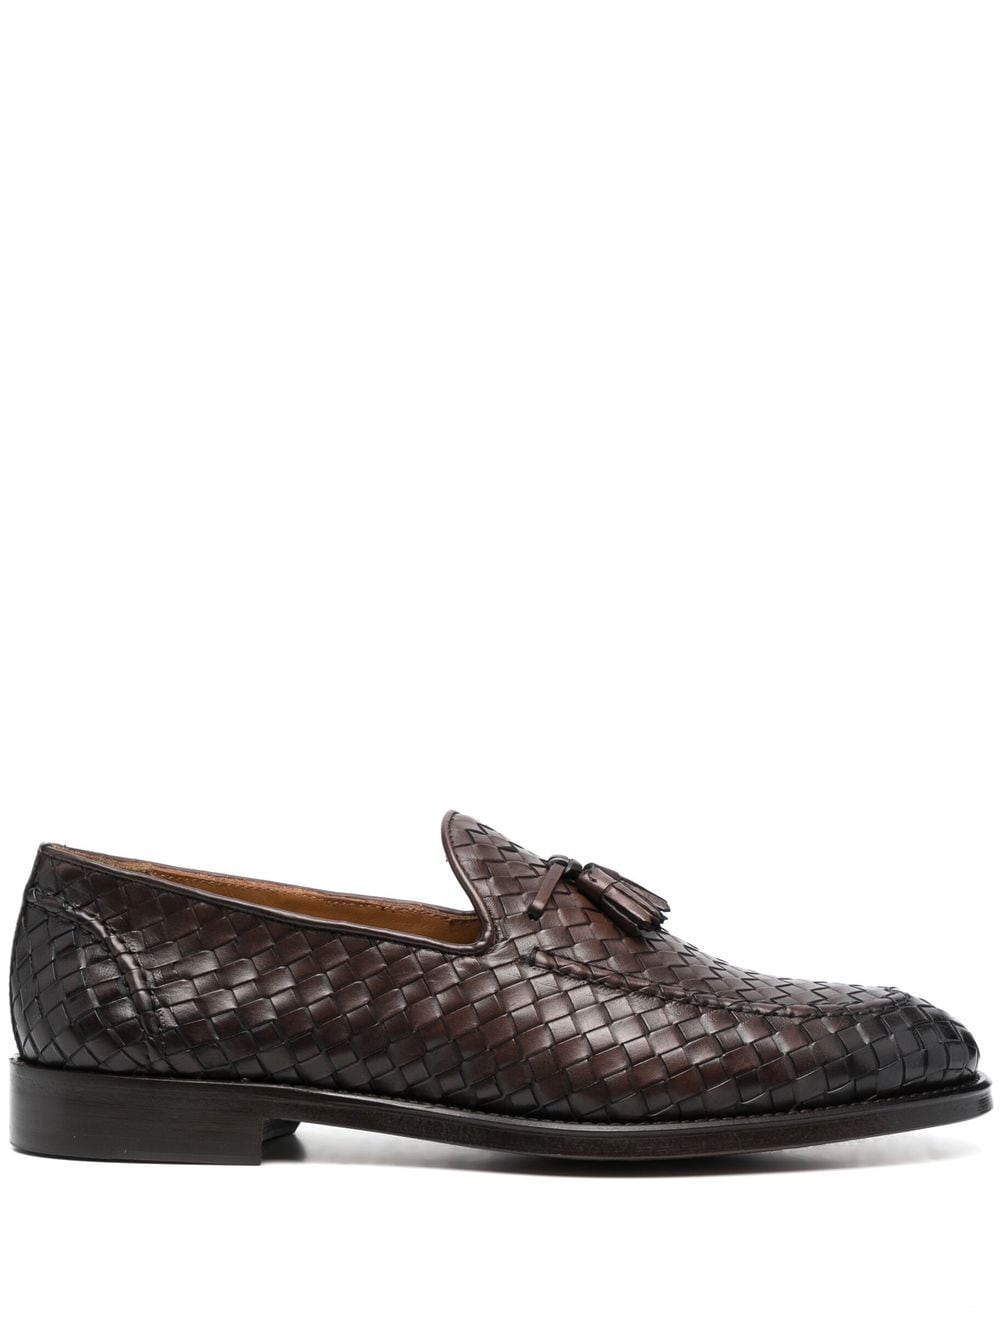 Doucal's Loafer mit Webmuster - Braun von Doucal's